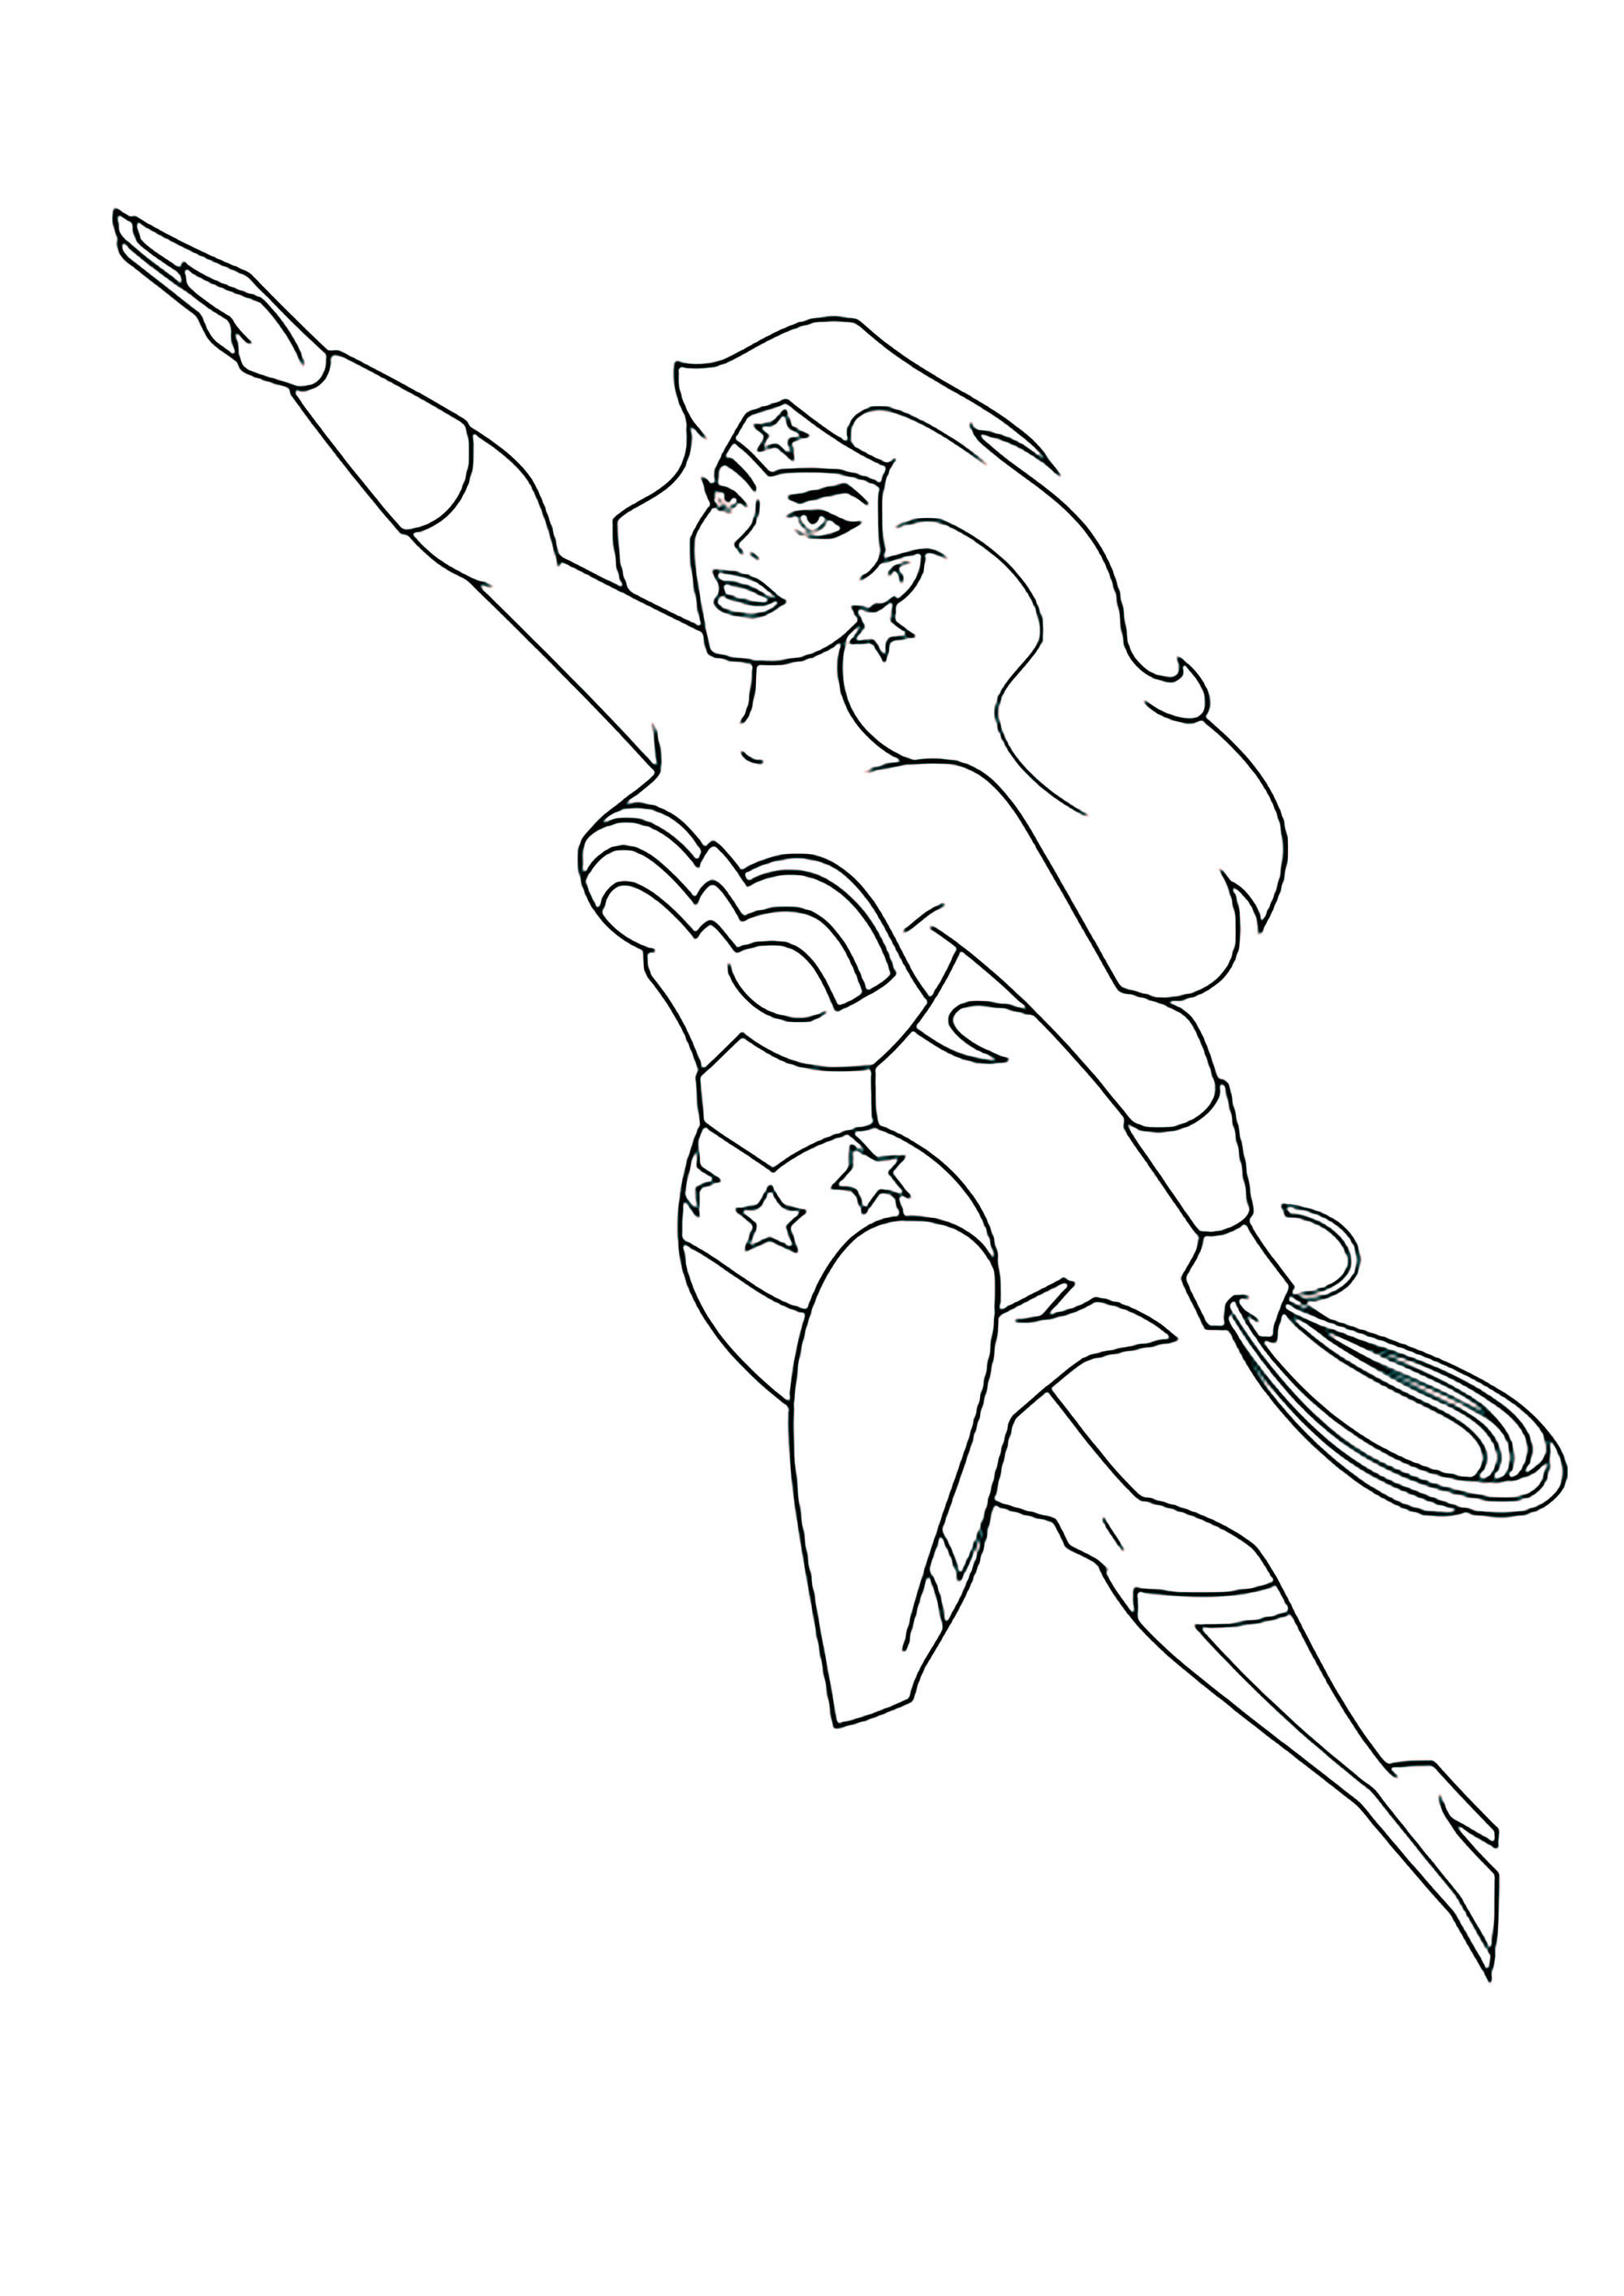 Wonder Woman Coloring Page childrencoloring.us